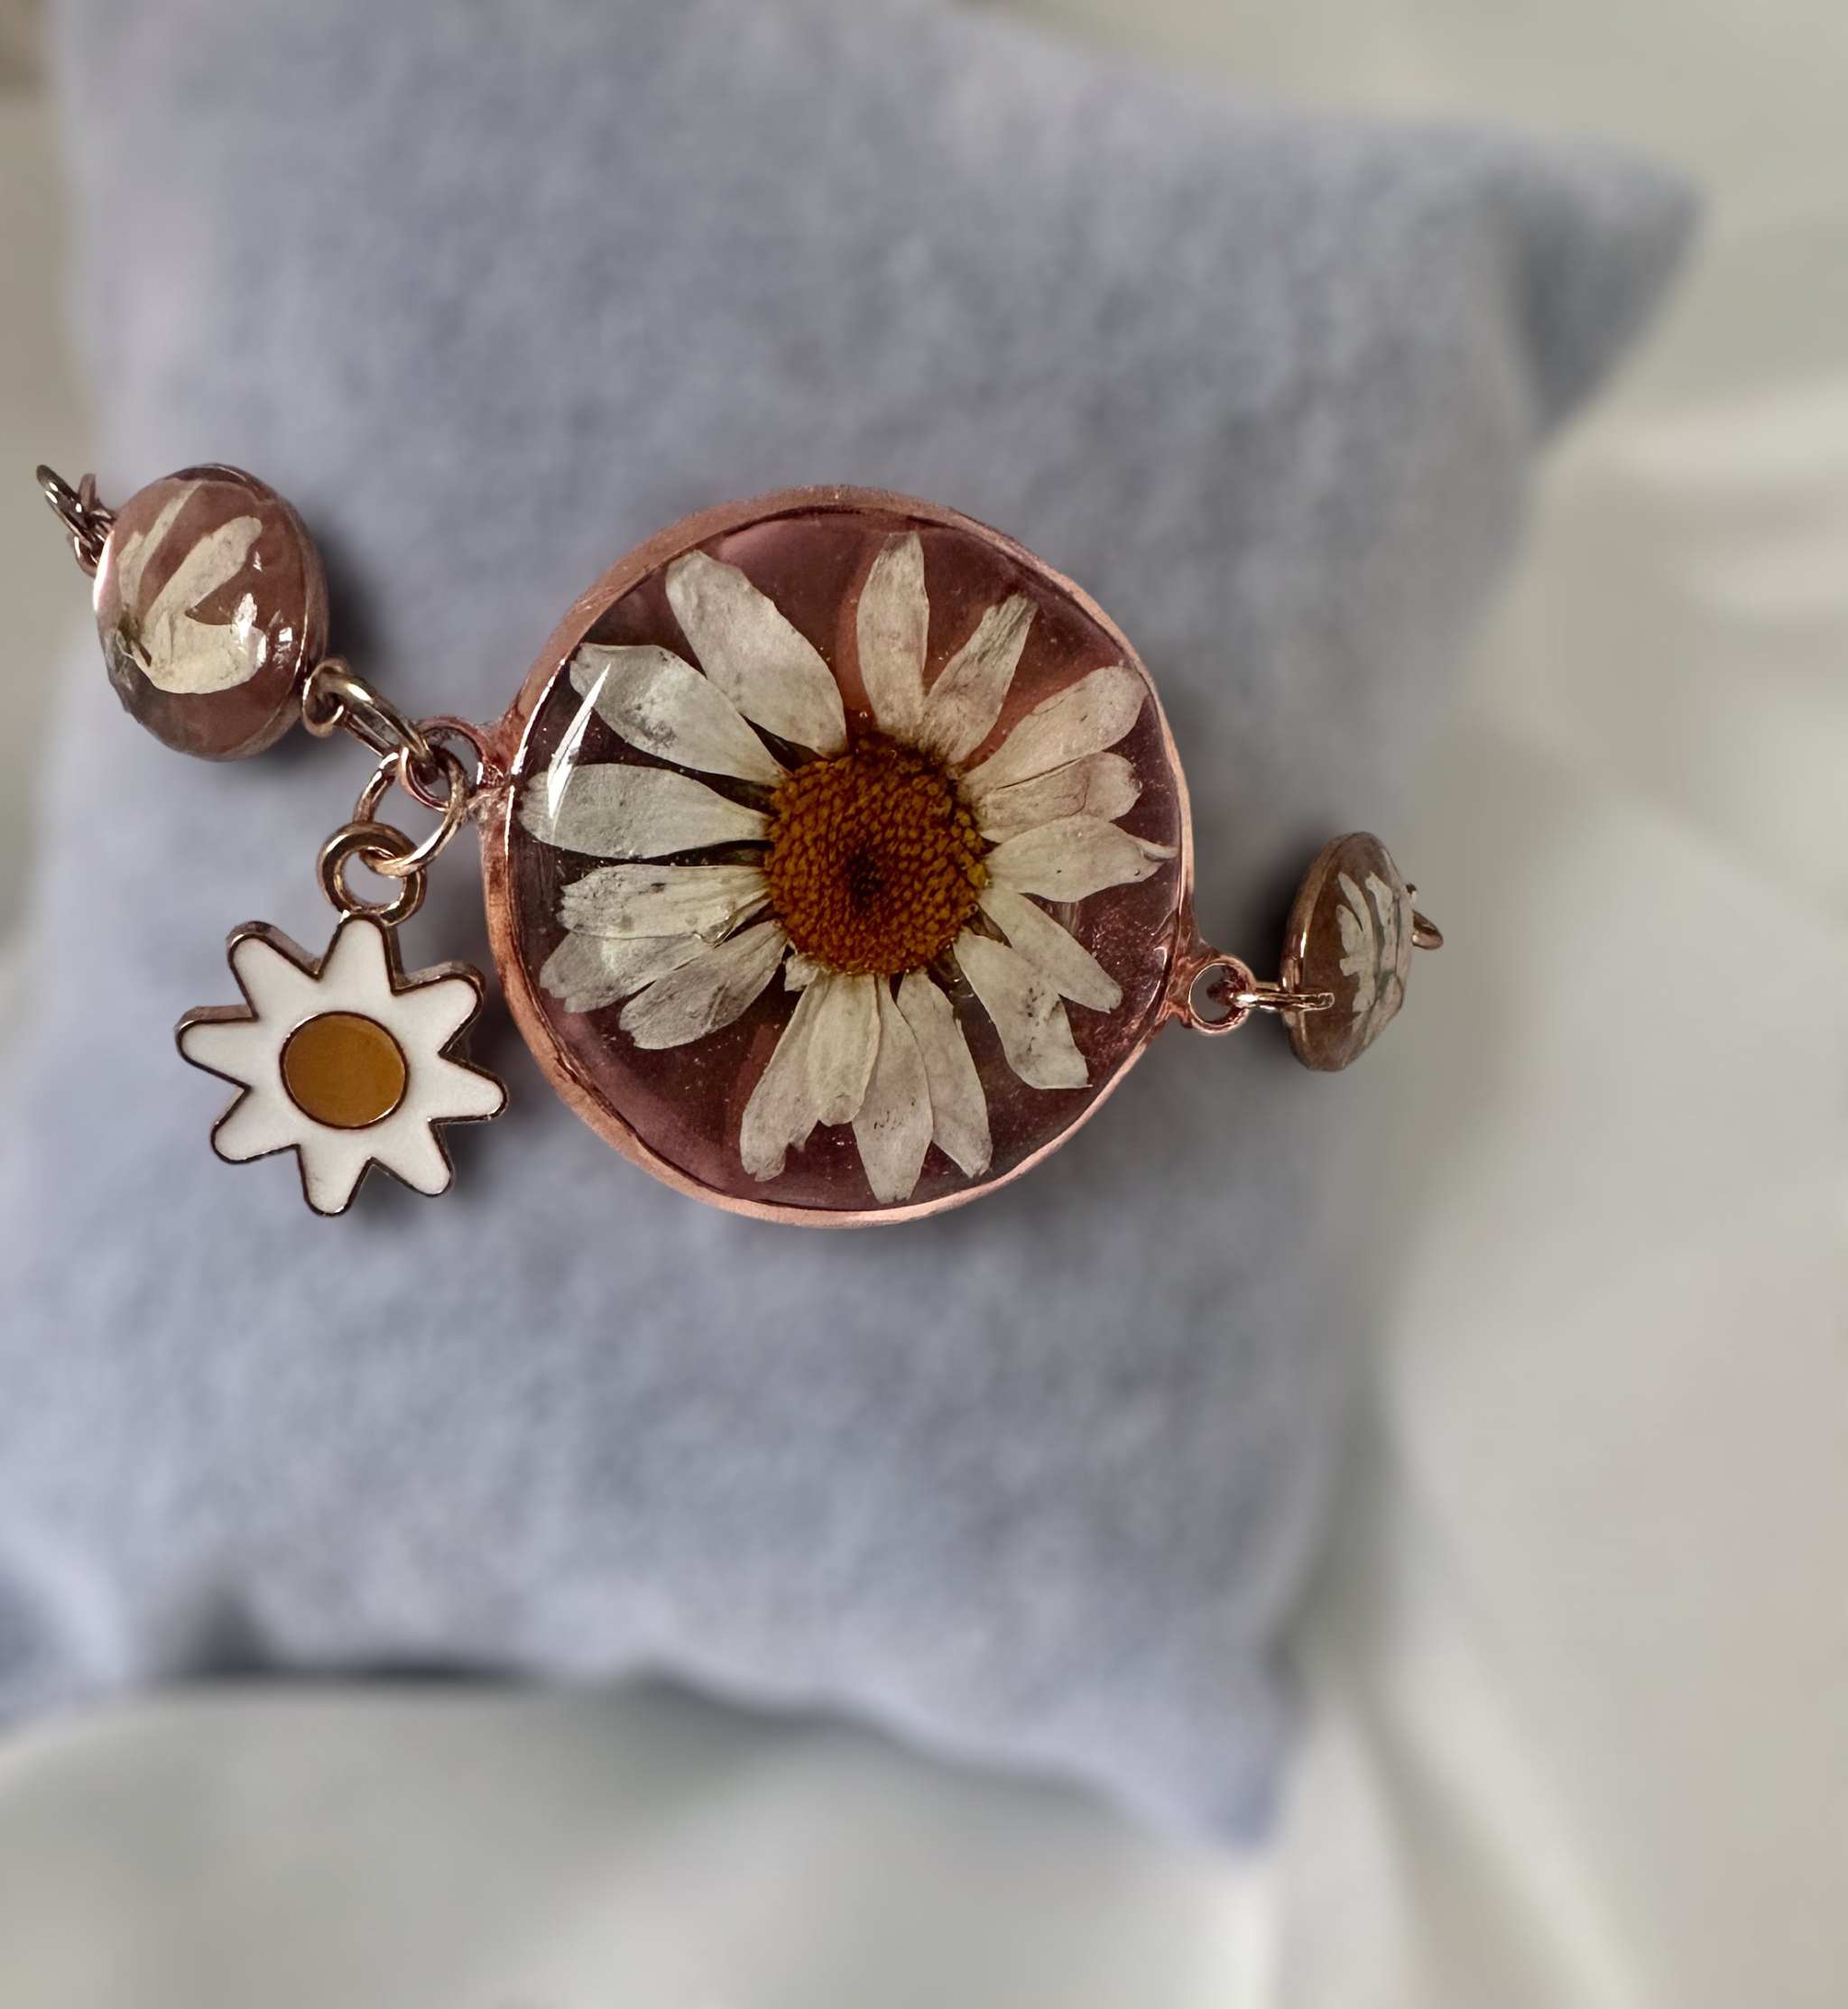 Botanical bracelets with real flowers by Smile with Flower.